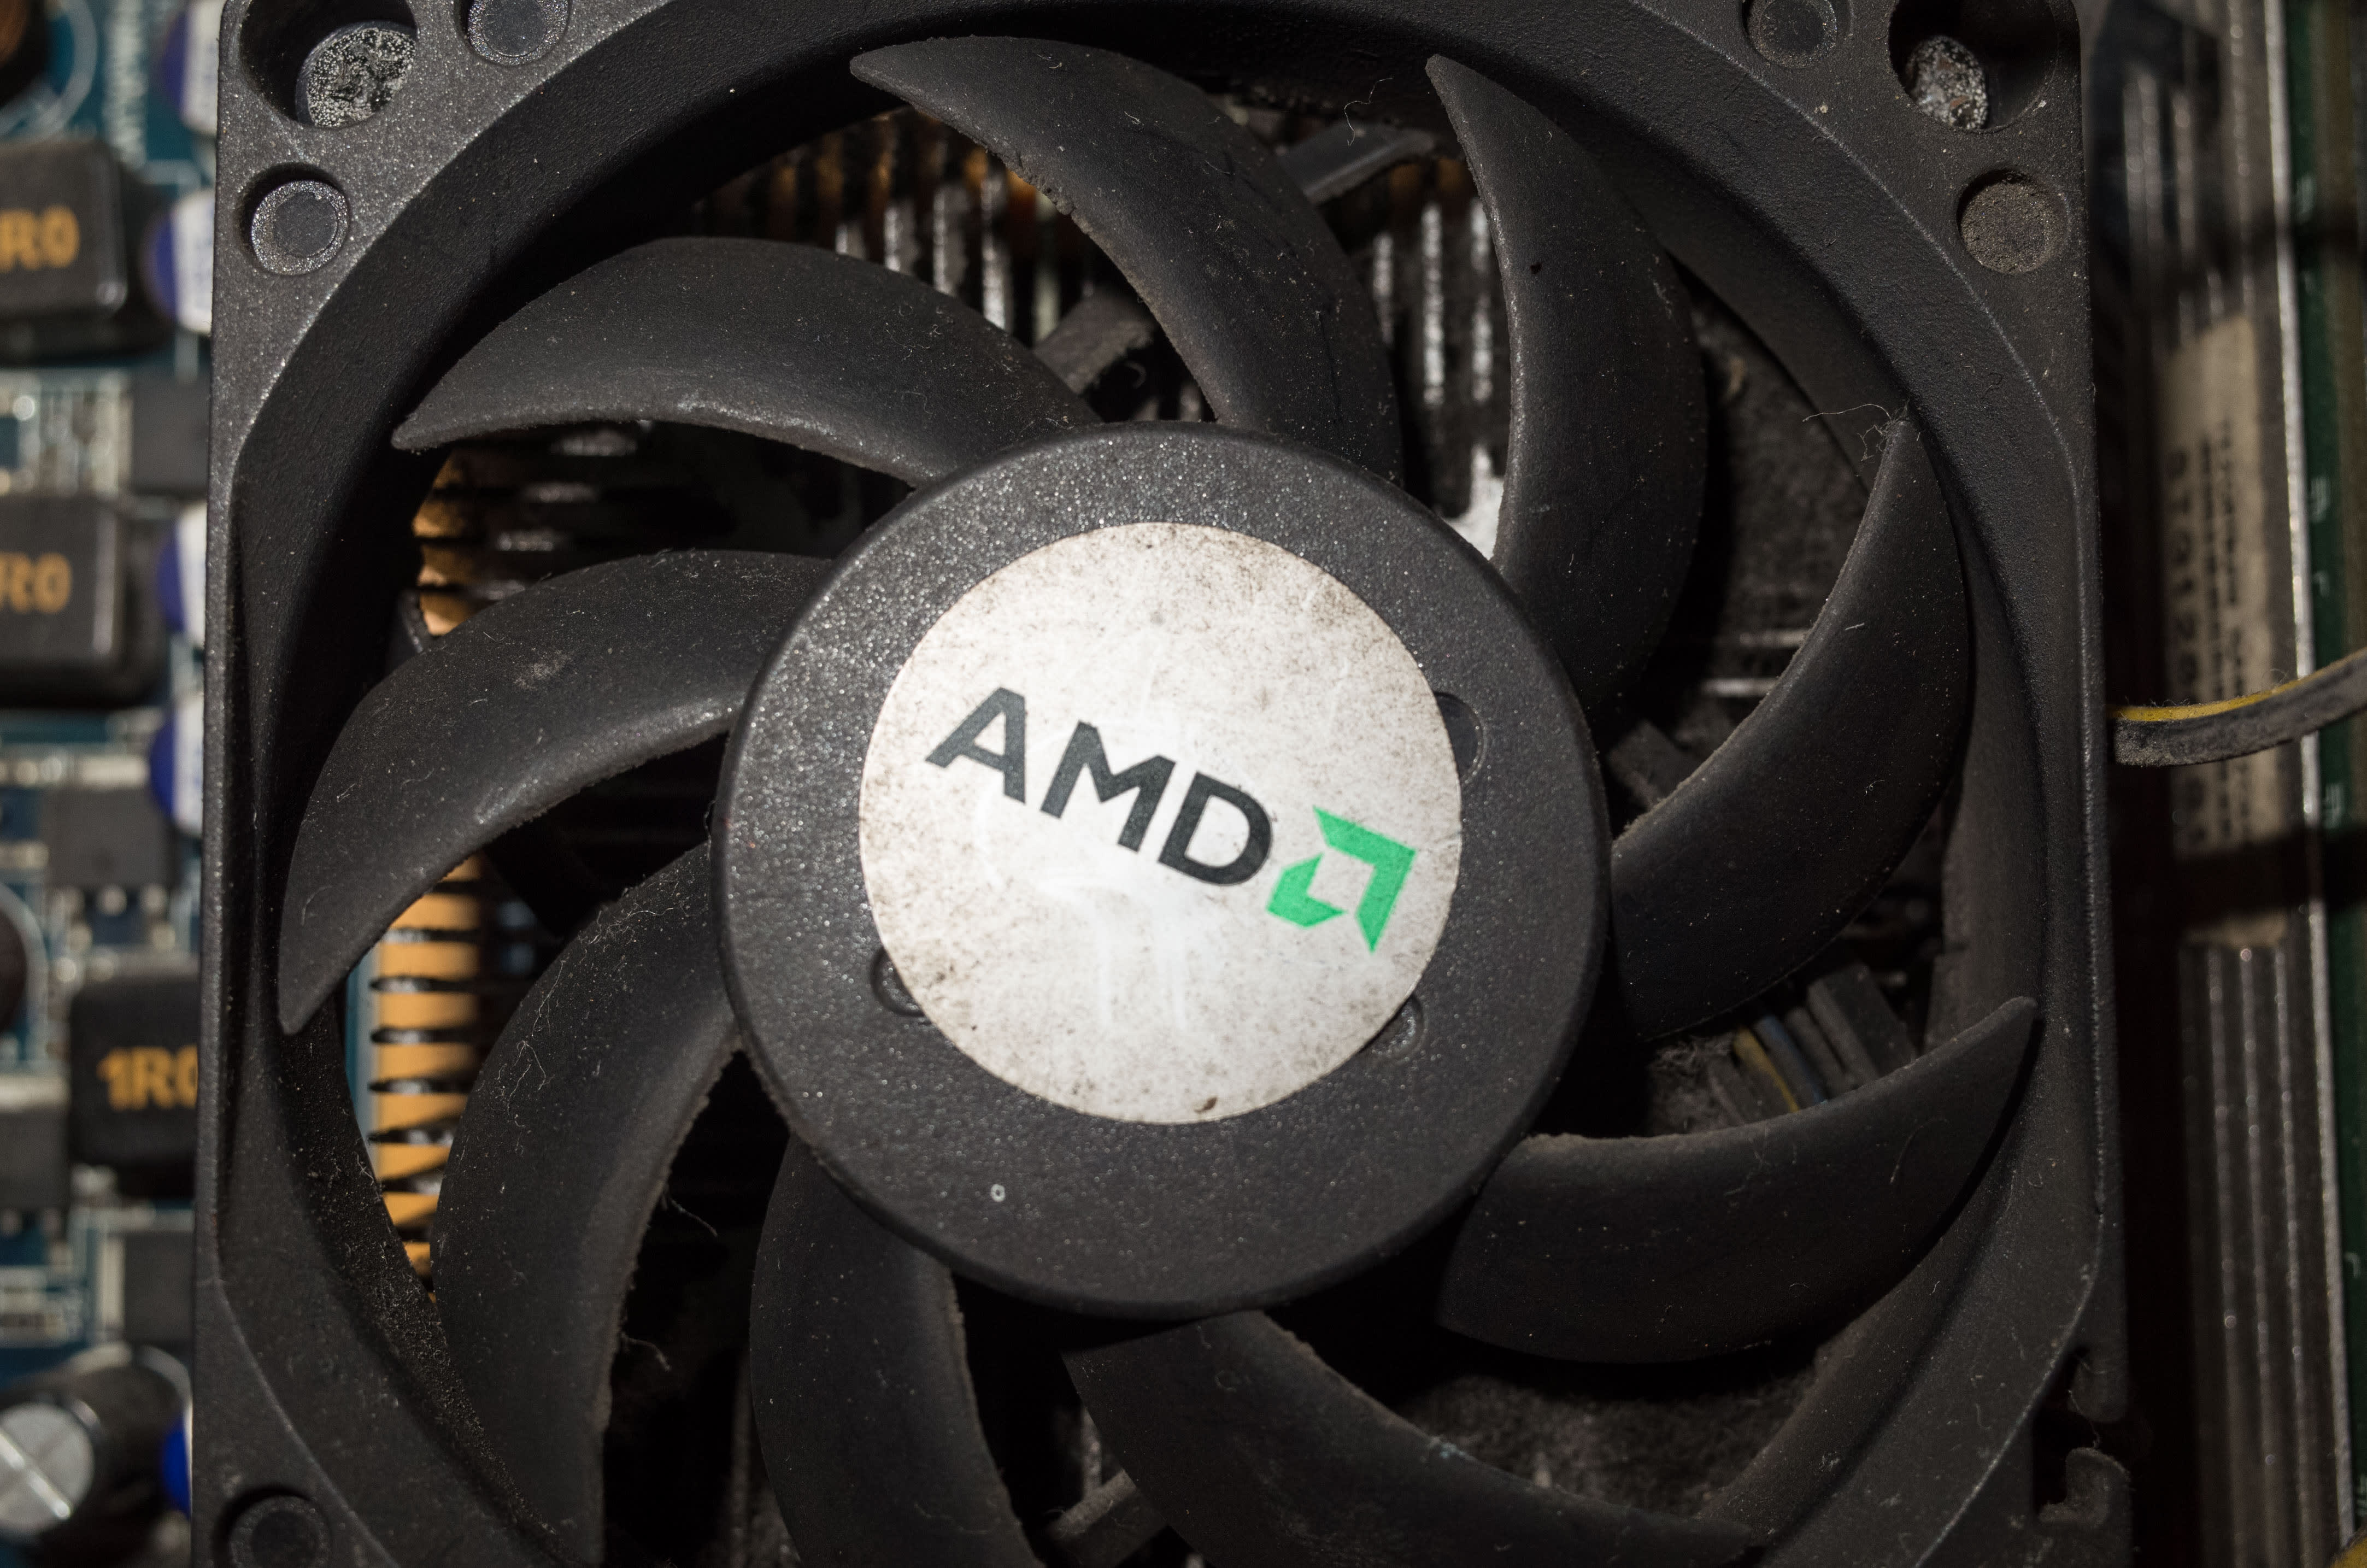 AMD can ride the AI ​​wave to take bigger market share from rivals, Bank of America says